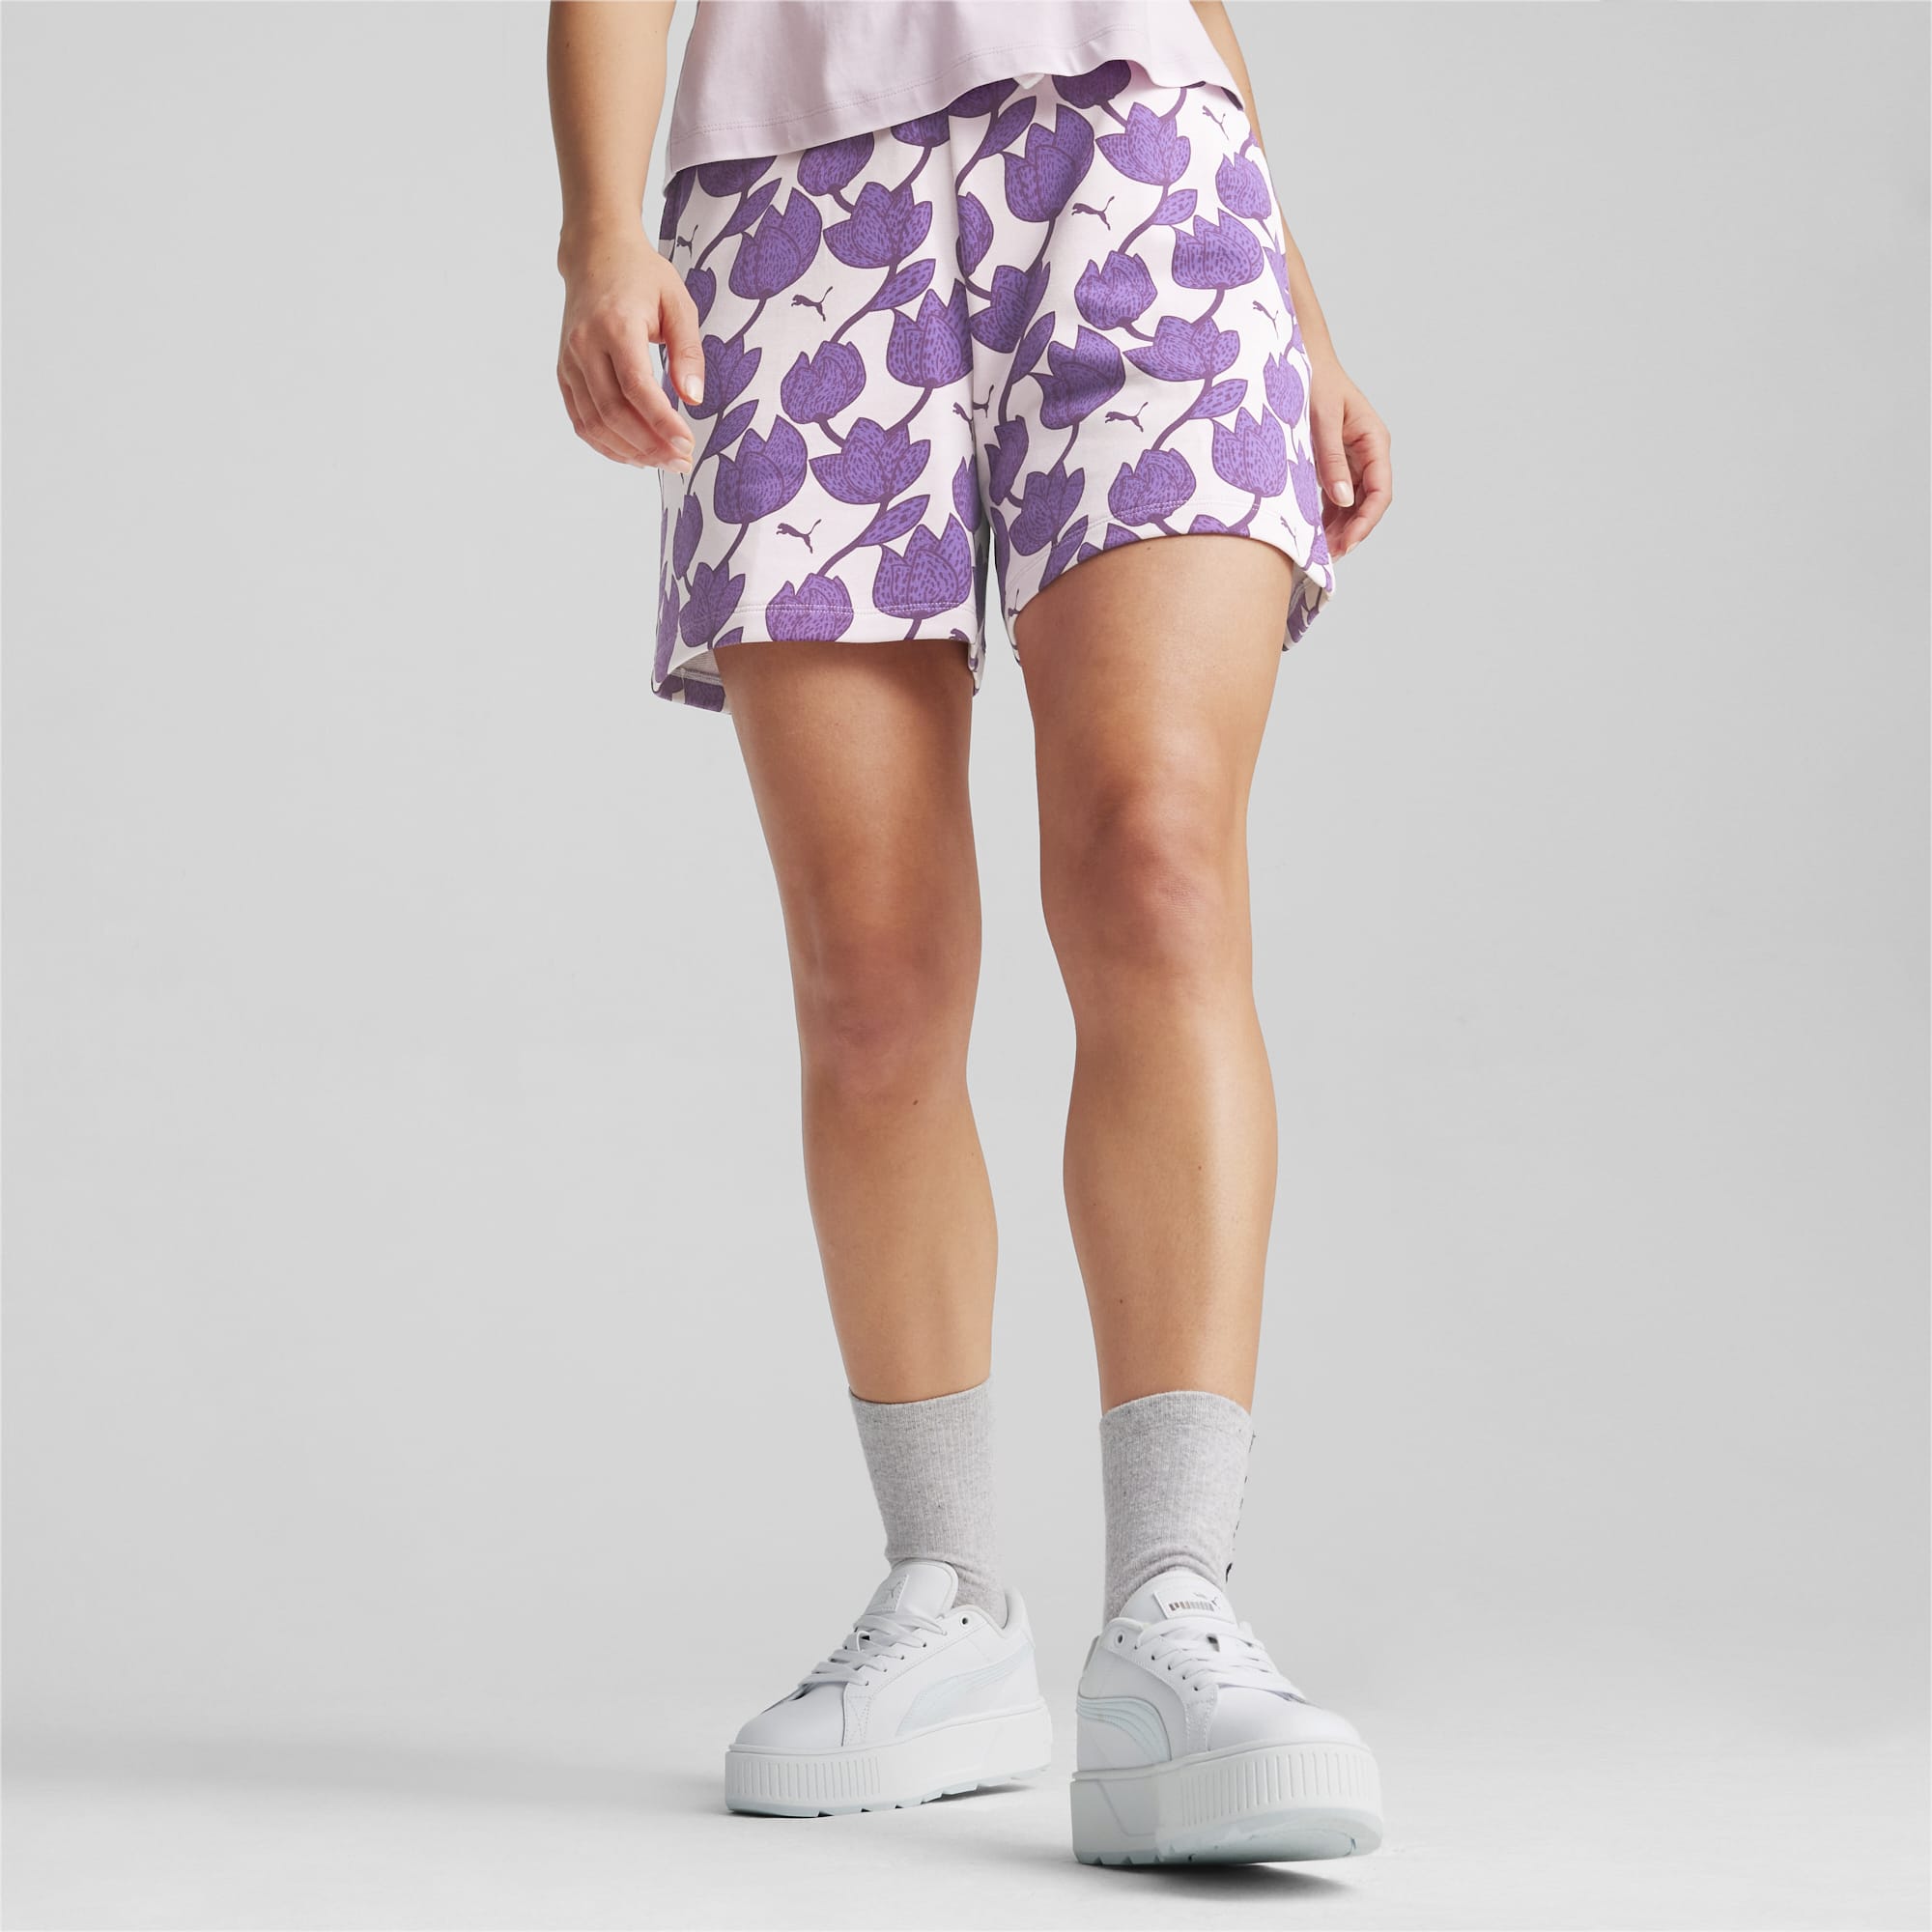 BLOSSOM Women's Floral Patterned Shorts